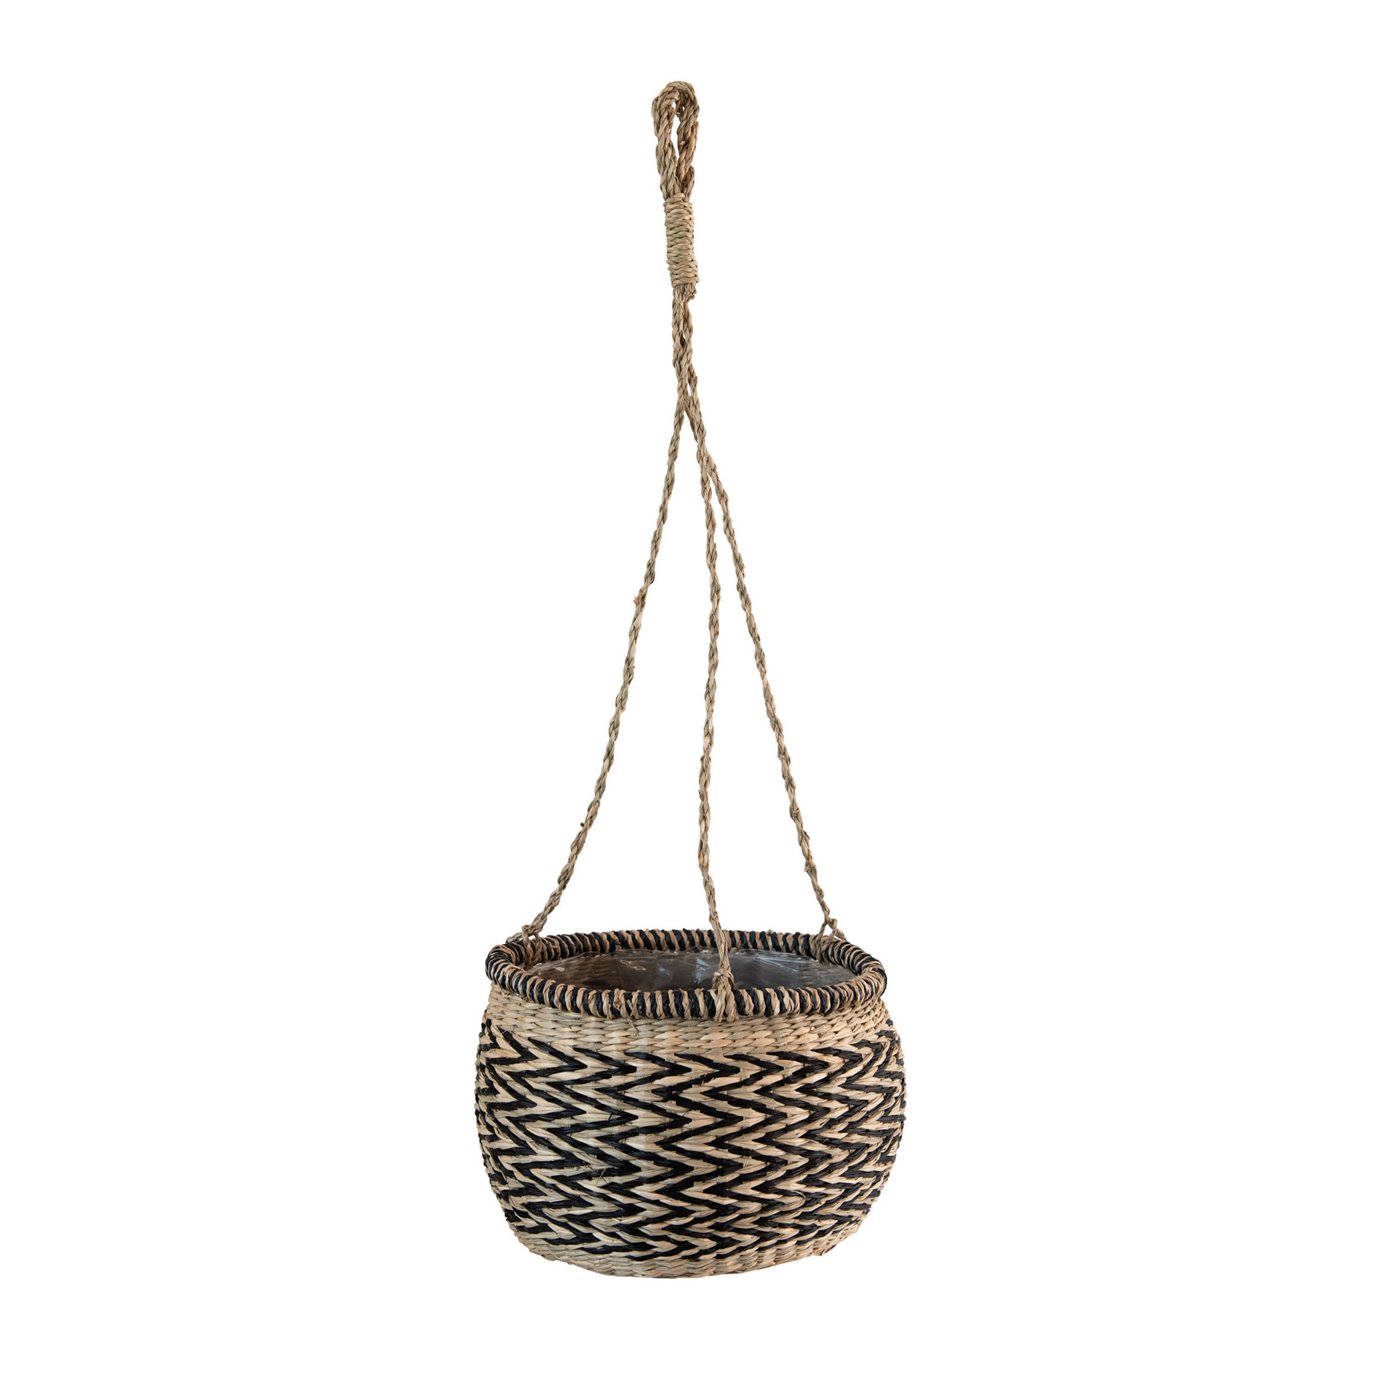 Hand-Woven Hanging Seagrass Basket Planter with Plastic Lining, Natural & Black (Holds 7" Pot)